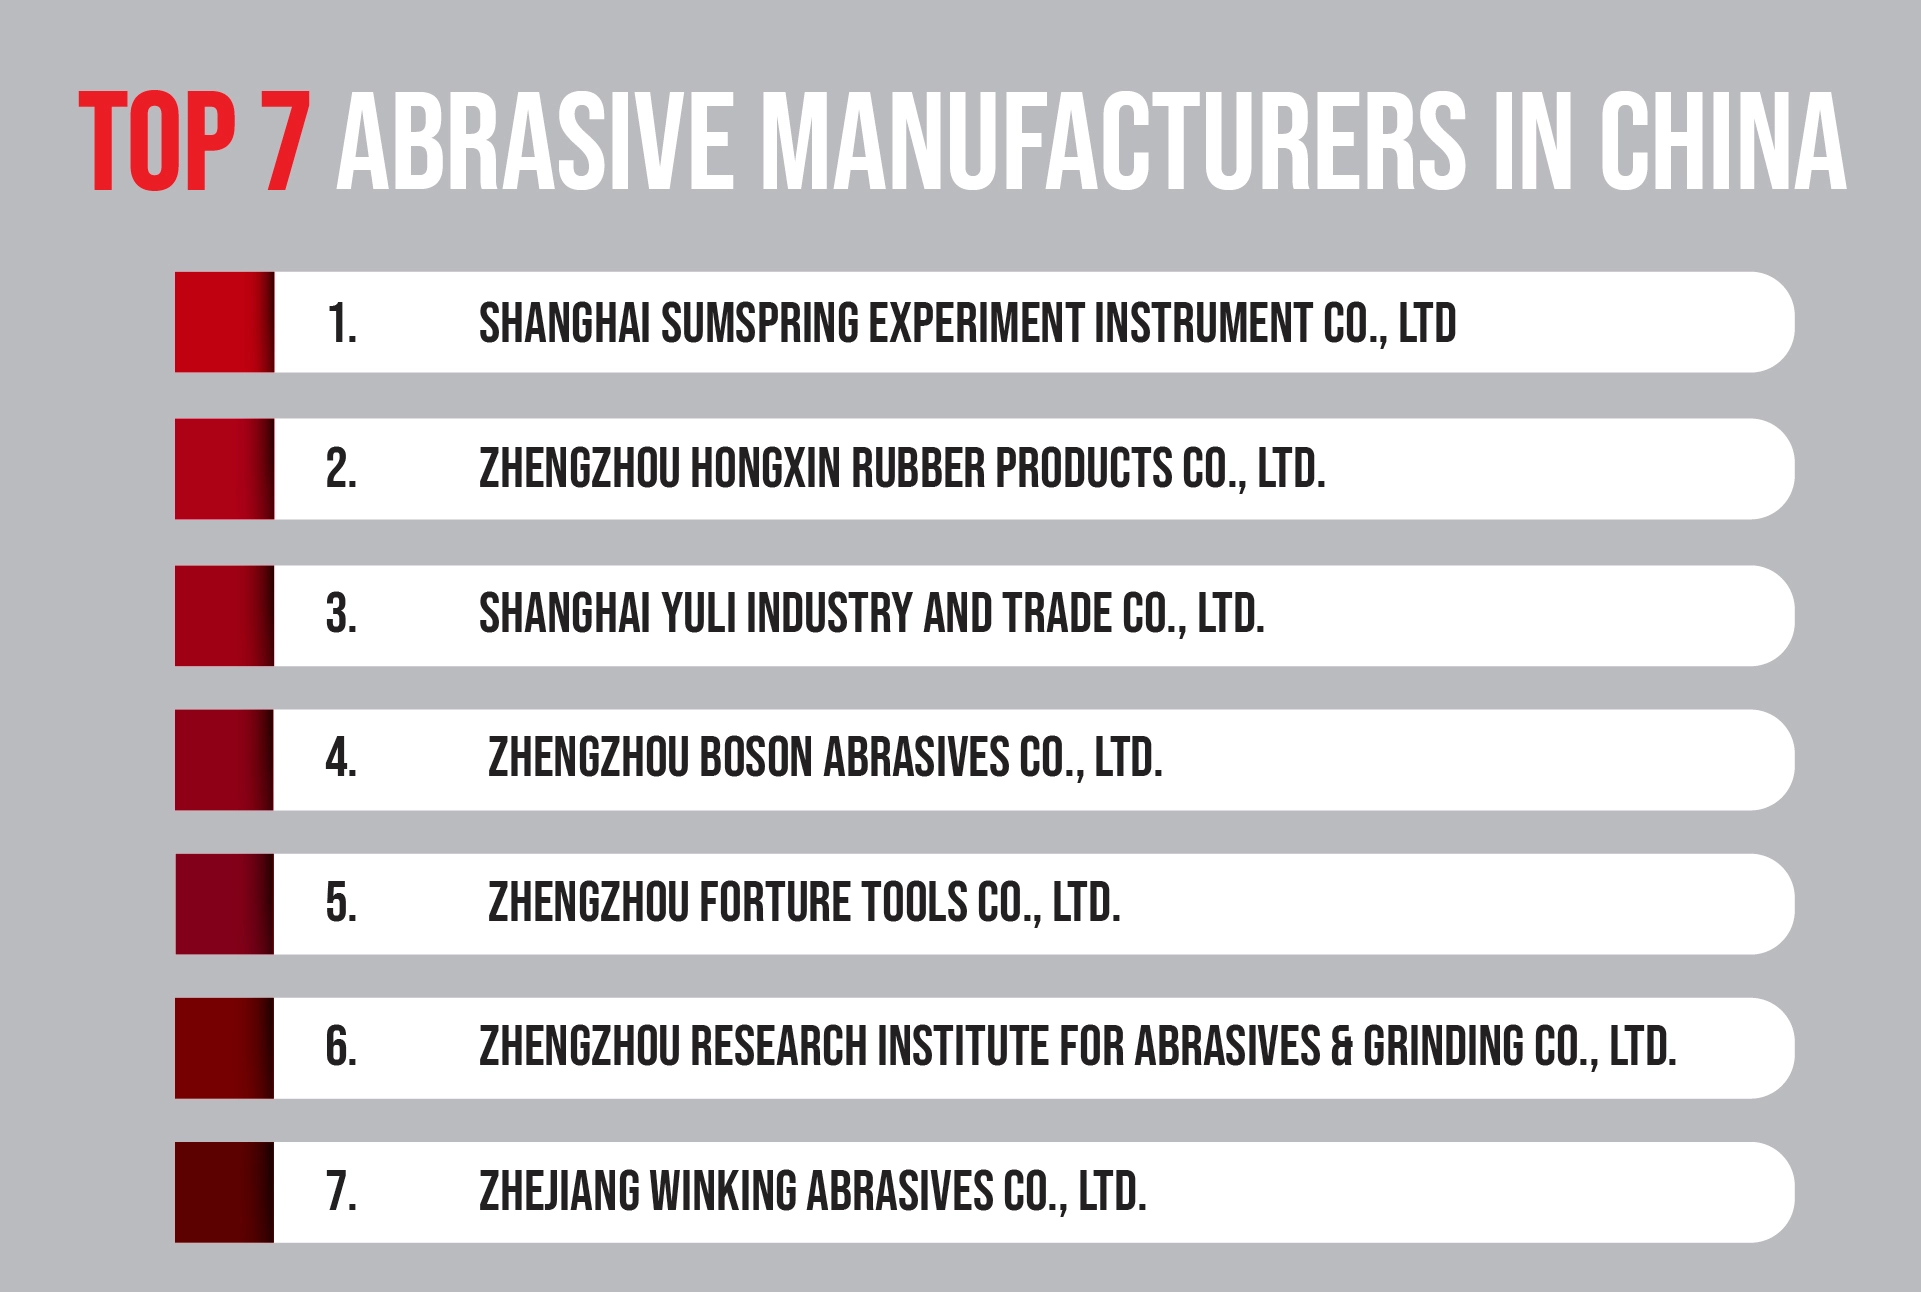 A list of Chinese abrasive manufacturers